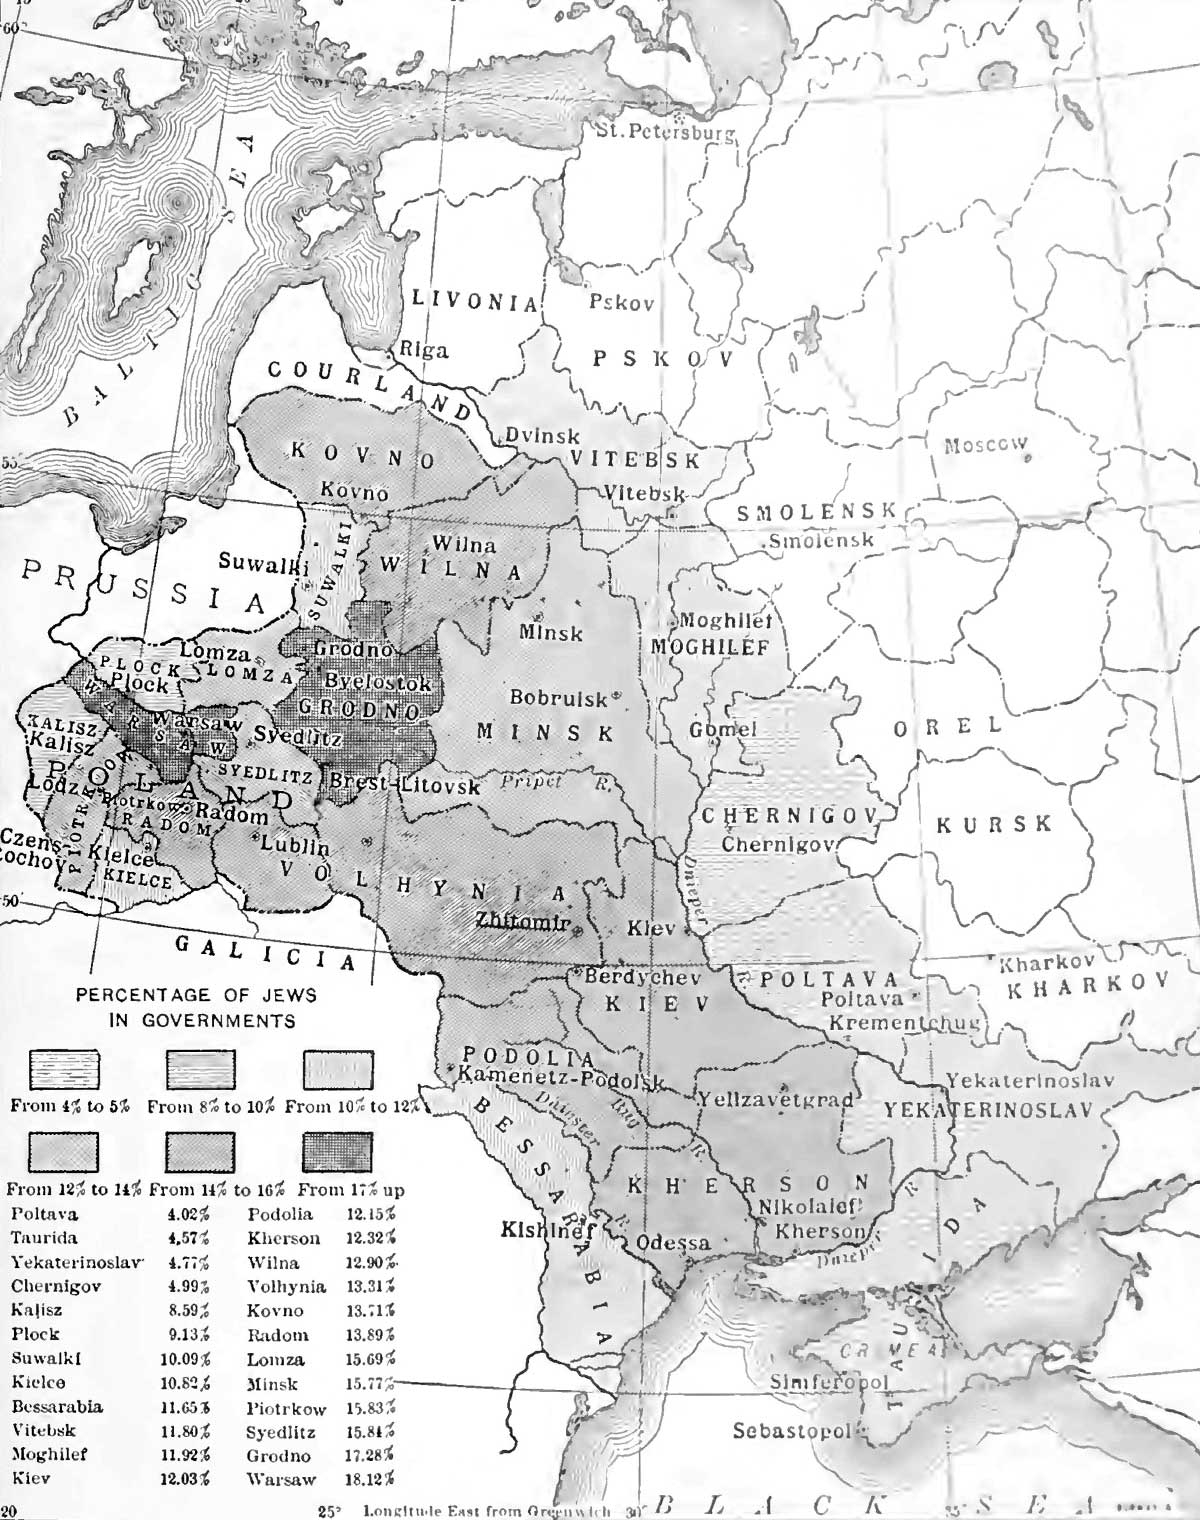 Map - Percentage of Jews in the Pale of Settlement and Congress Poland